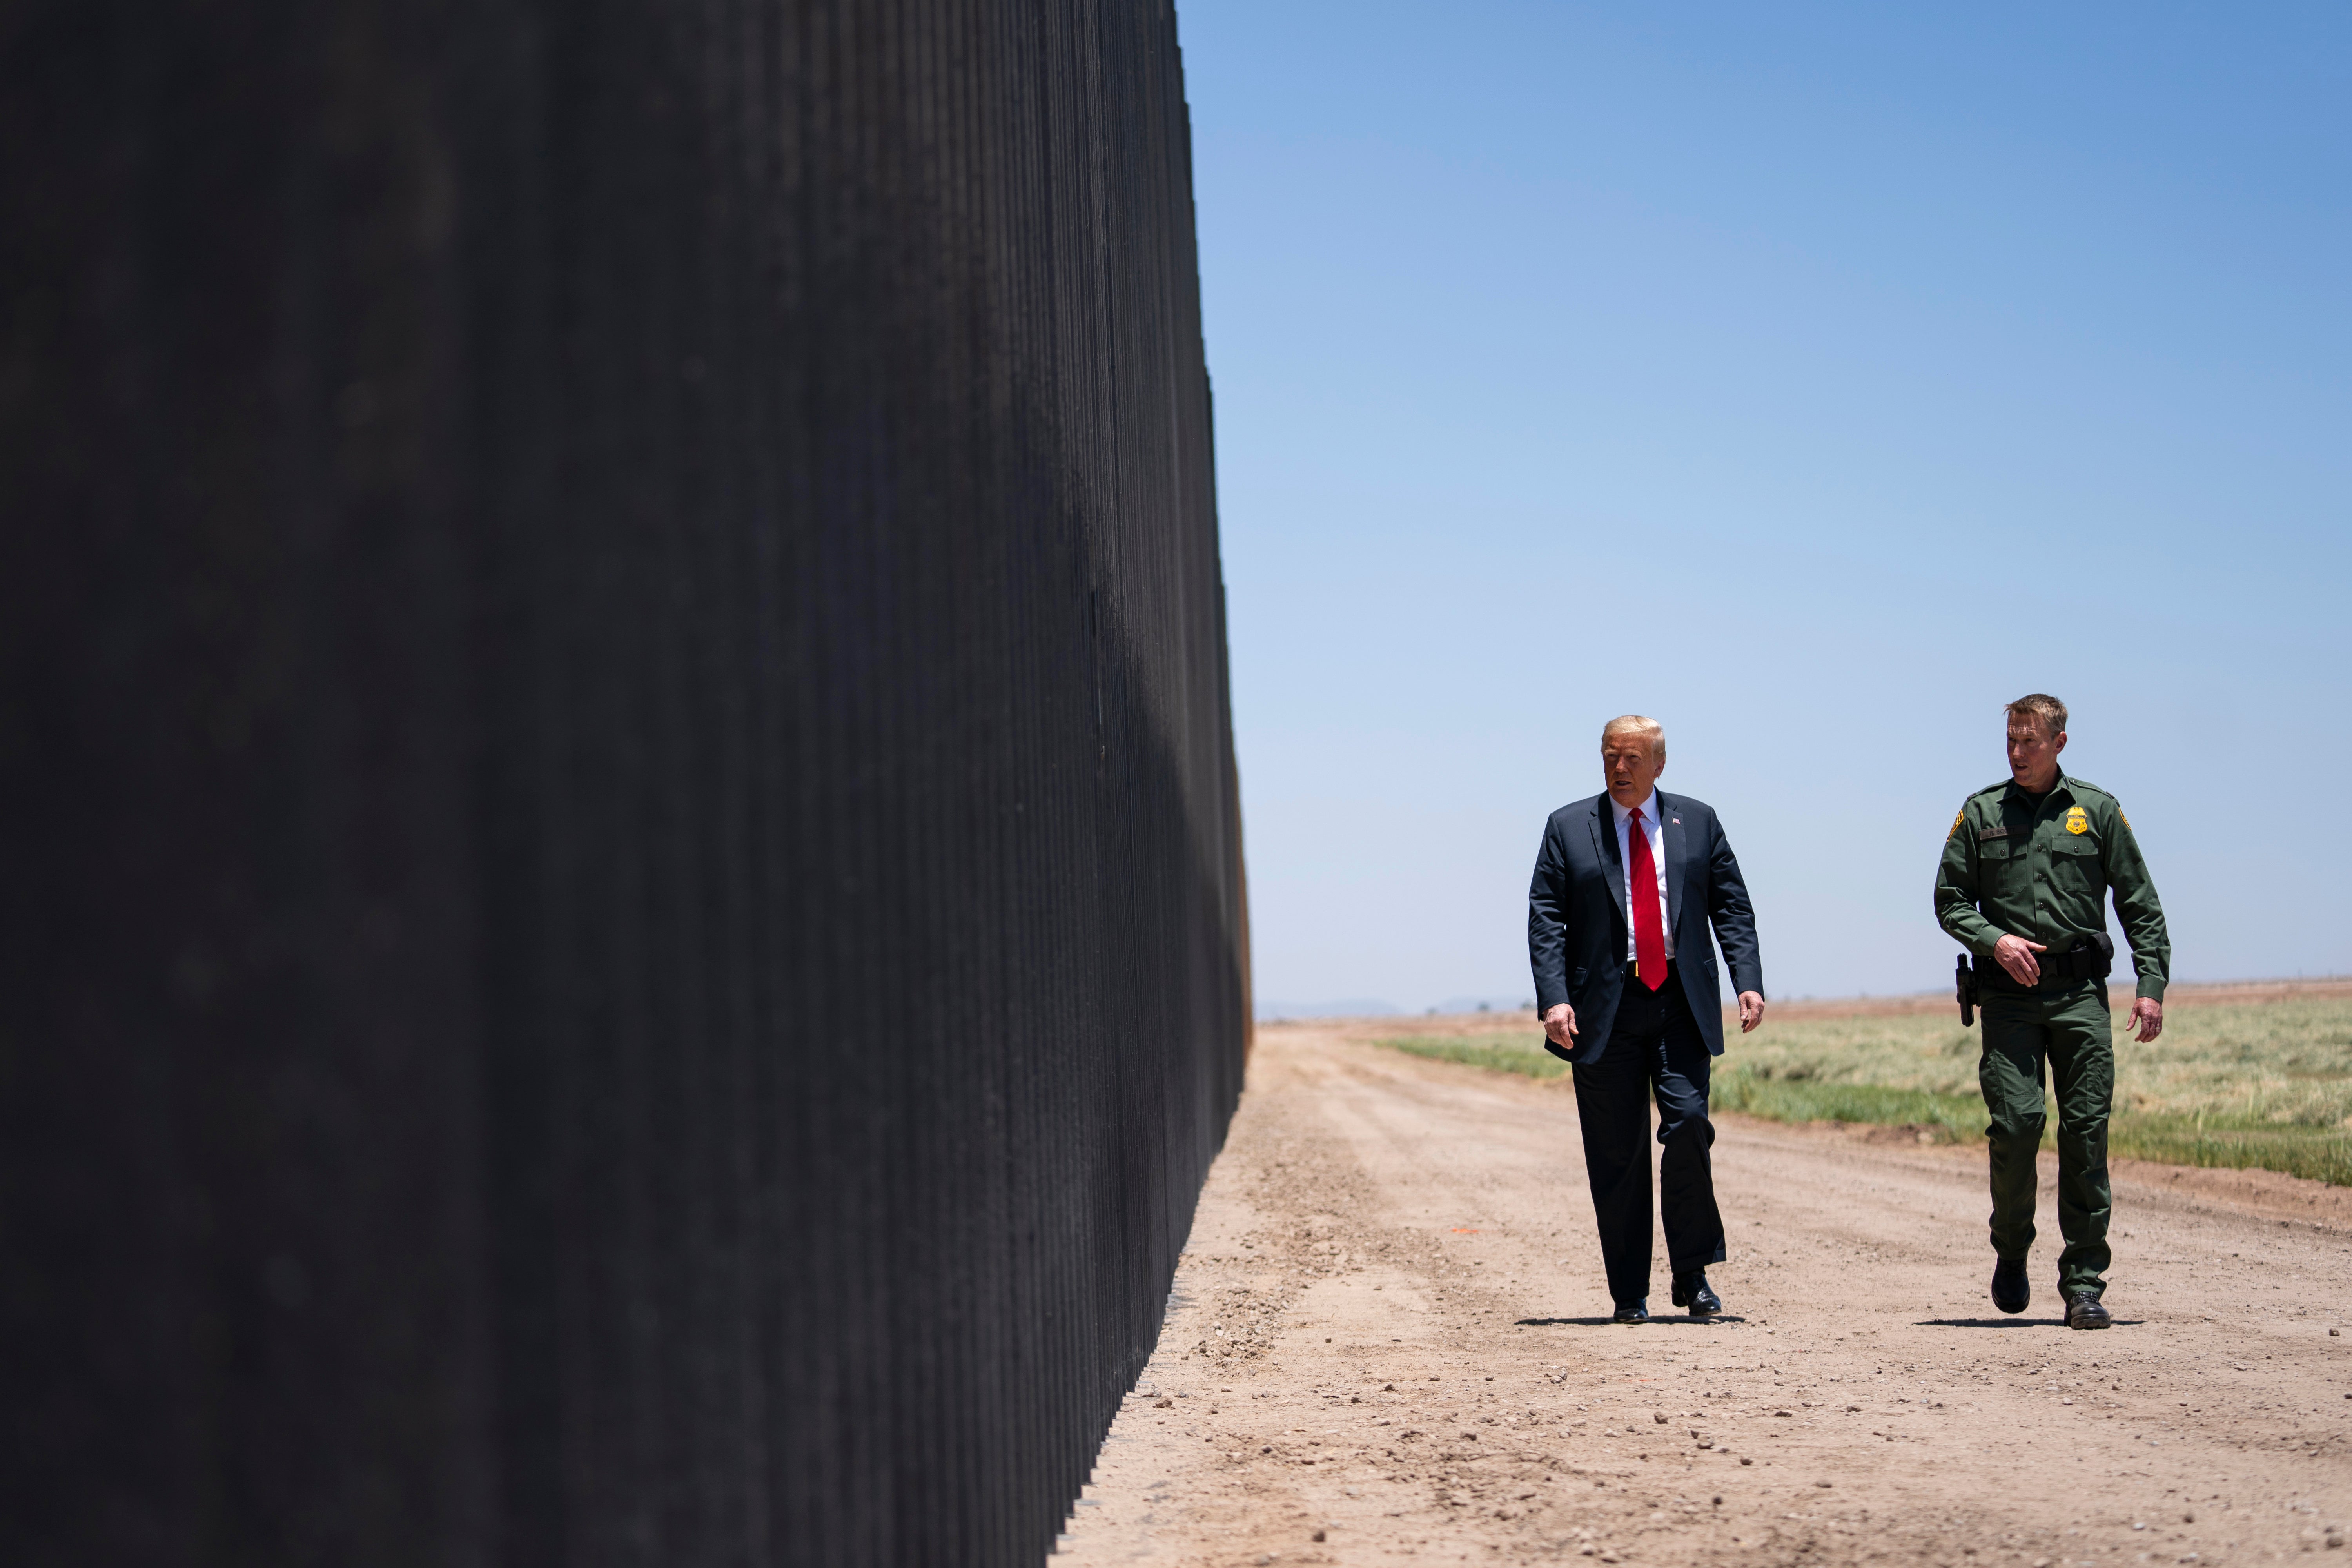 Donald Trump slammed Joe Biden’s border policies as ‘depraved’ today in an op-ed ahead of the former president’s visit to the US-Mexico border.